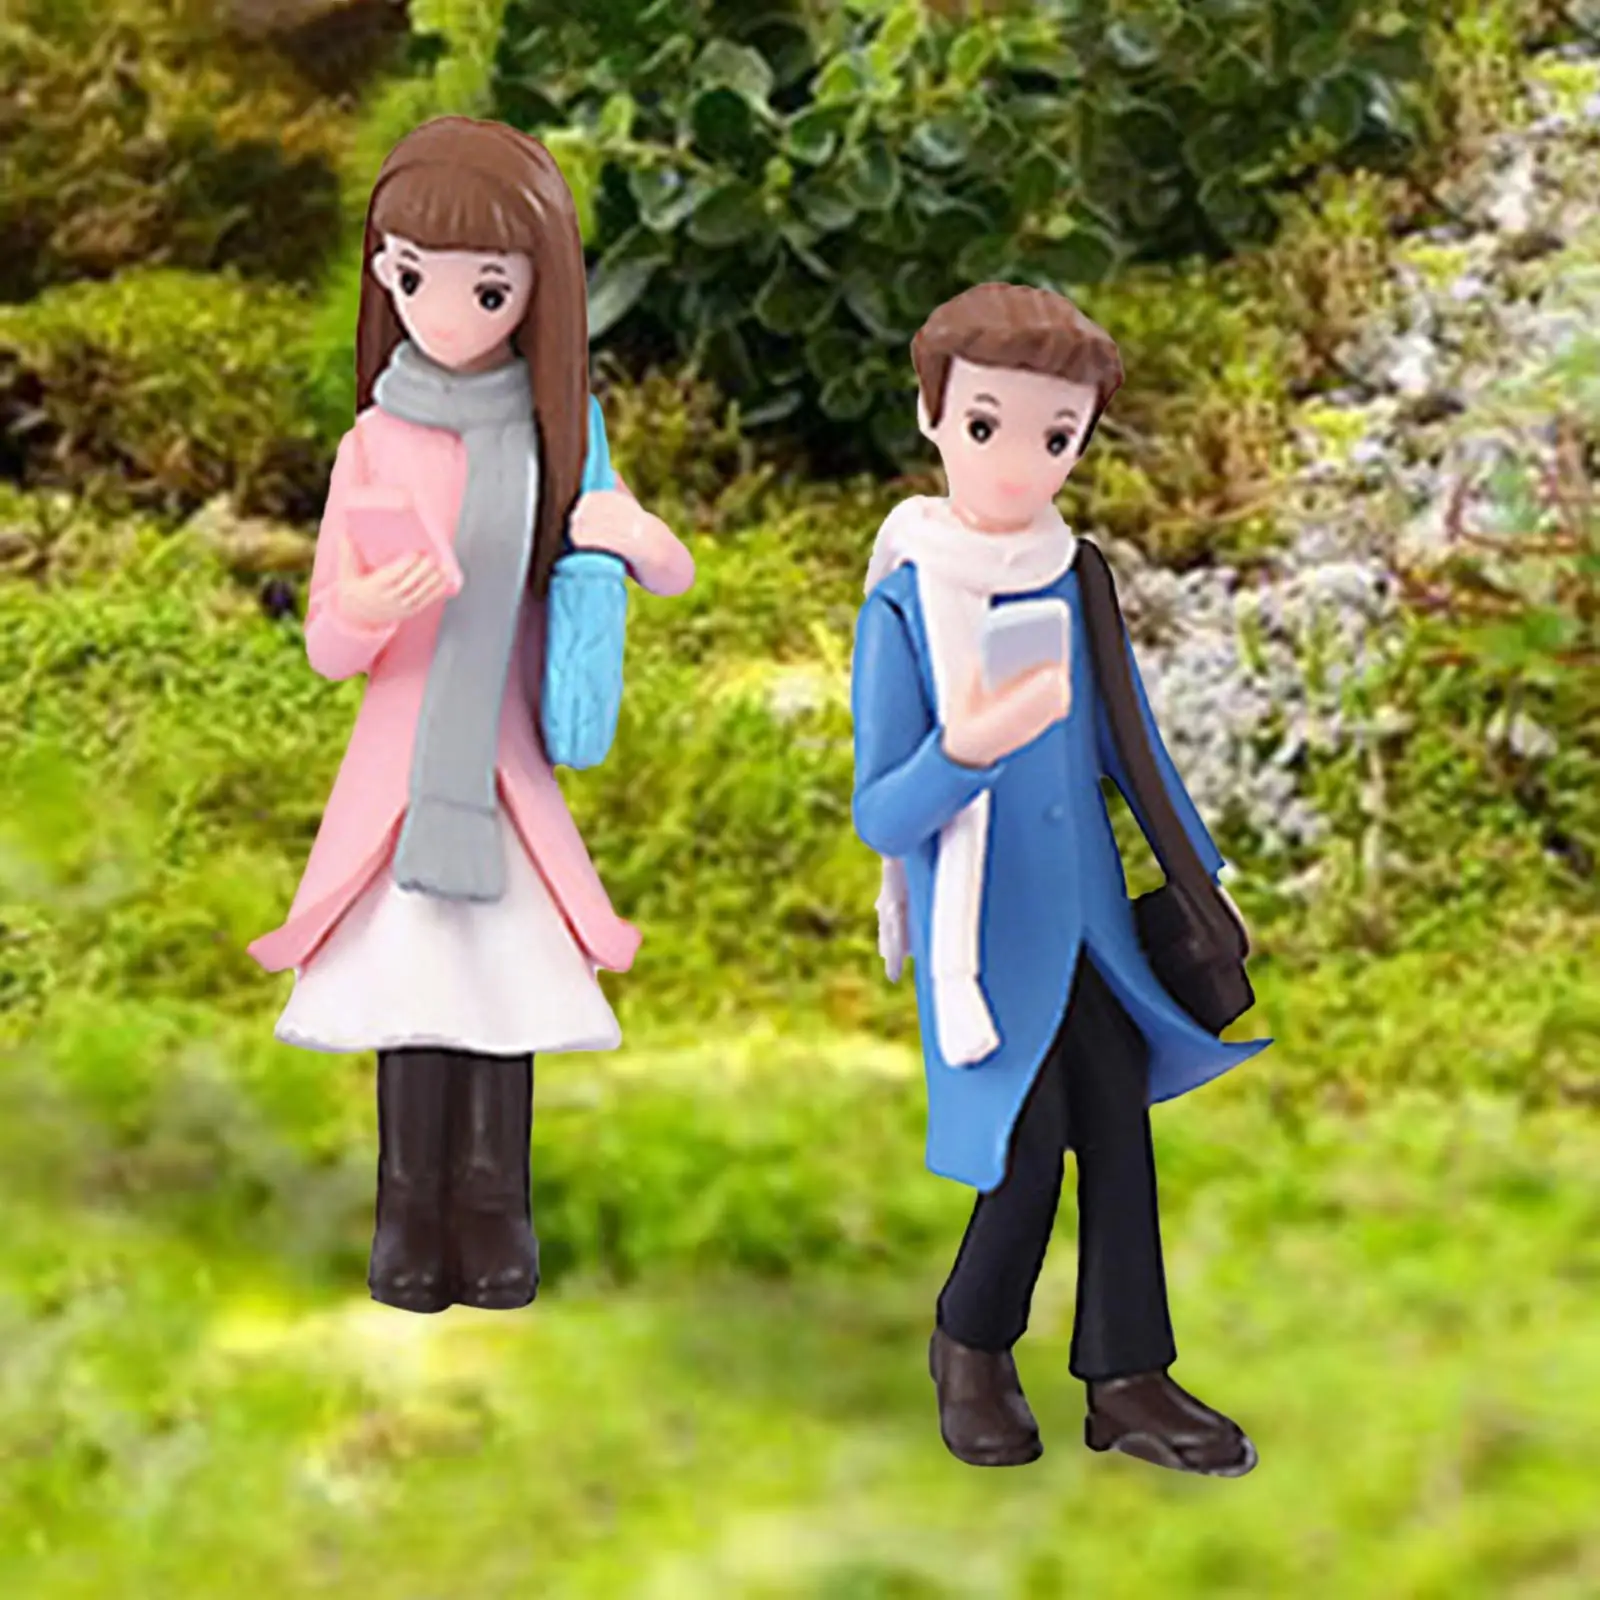 Phone Couple Collection Diorama Street Character Figure Hand Painted People Model for Micro Landscapes Dollhouse Diorama Layout